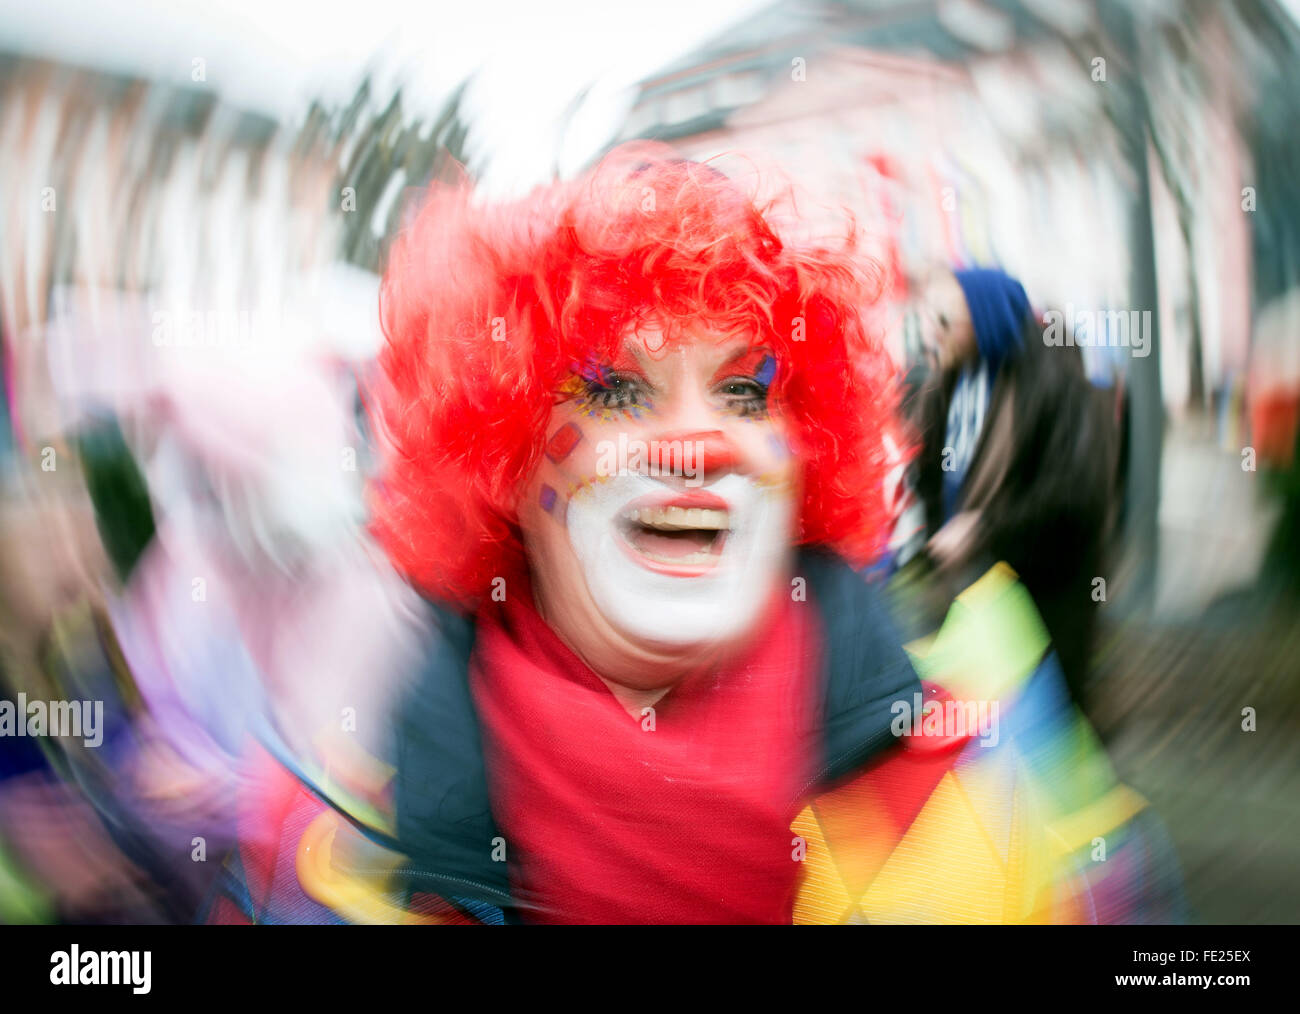 Mainz, Germany. 4th Feb, 2016. A feamle Carnival enthuasiast diguised as a clown cheers on the central 'Fastnachtsbrunnen' square during the street Carnival festivities in Mainz, Germany, 4 February 2016. The Women's Carnival marks the beginning of the street carnival season in Mainz. Photo: Frank Rumpenhorst/dpa/Alamy Live News Stock Photo